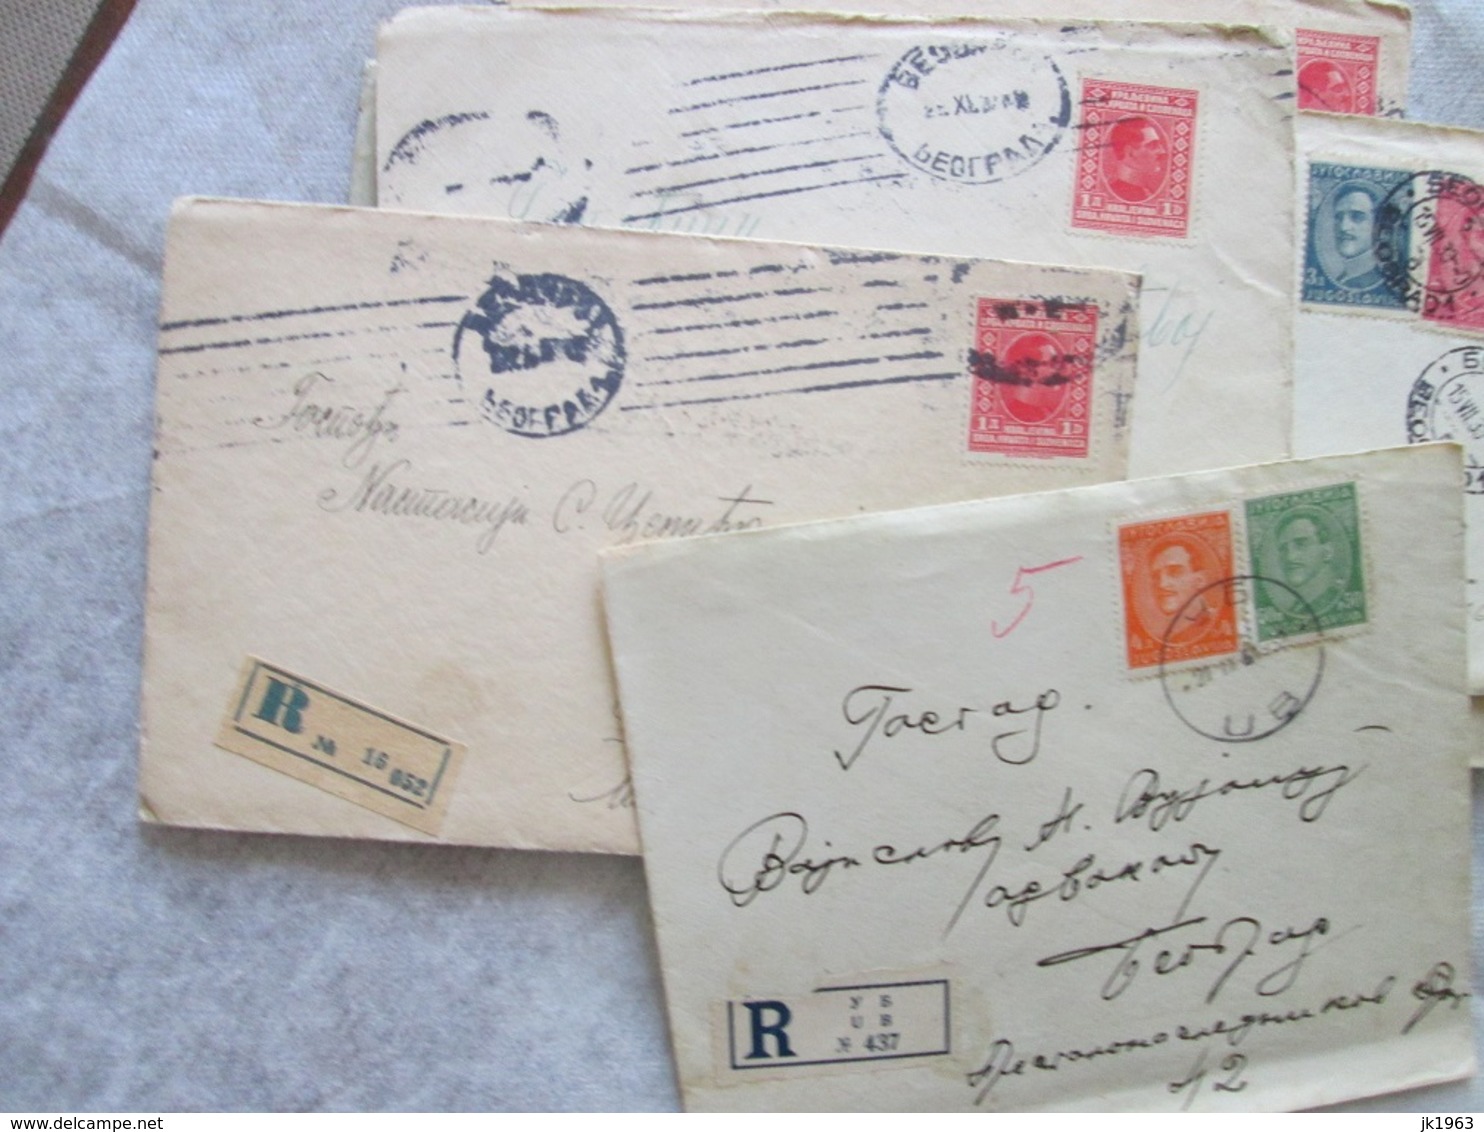 BIG LOT, 300+ COVERS, POSTCARDS, TELEGRAMS; 1500+WORLDWIDE STAMPS, AND OTHER, SEE 69 PHOTOS